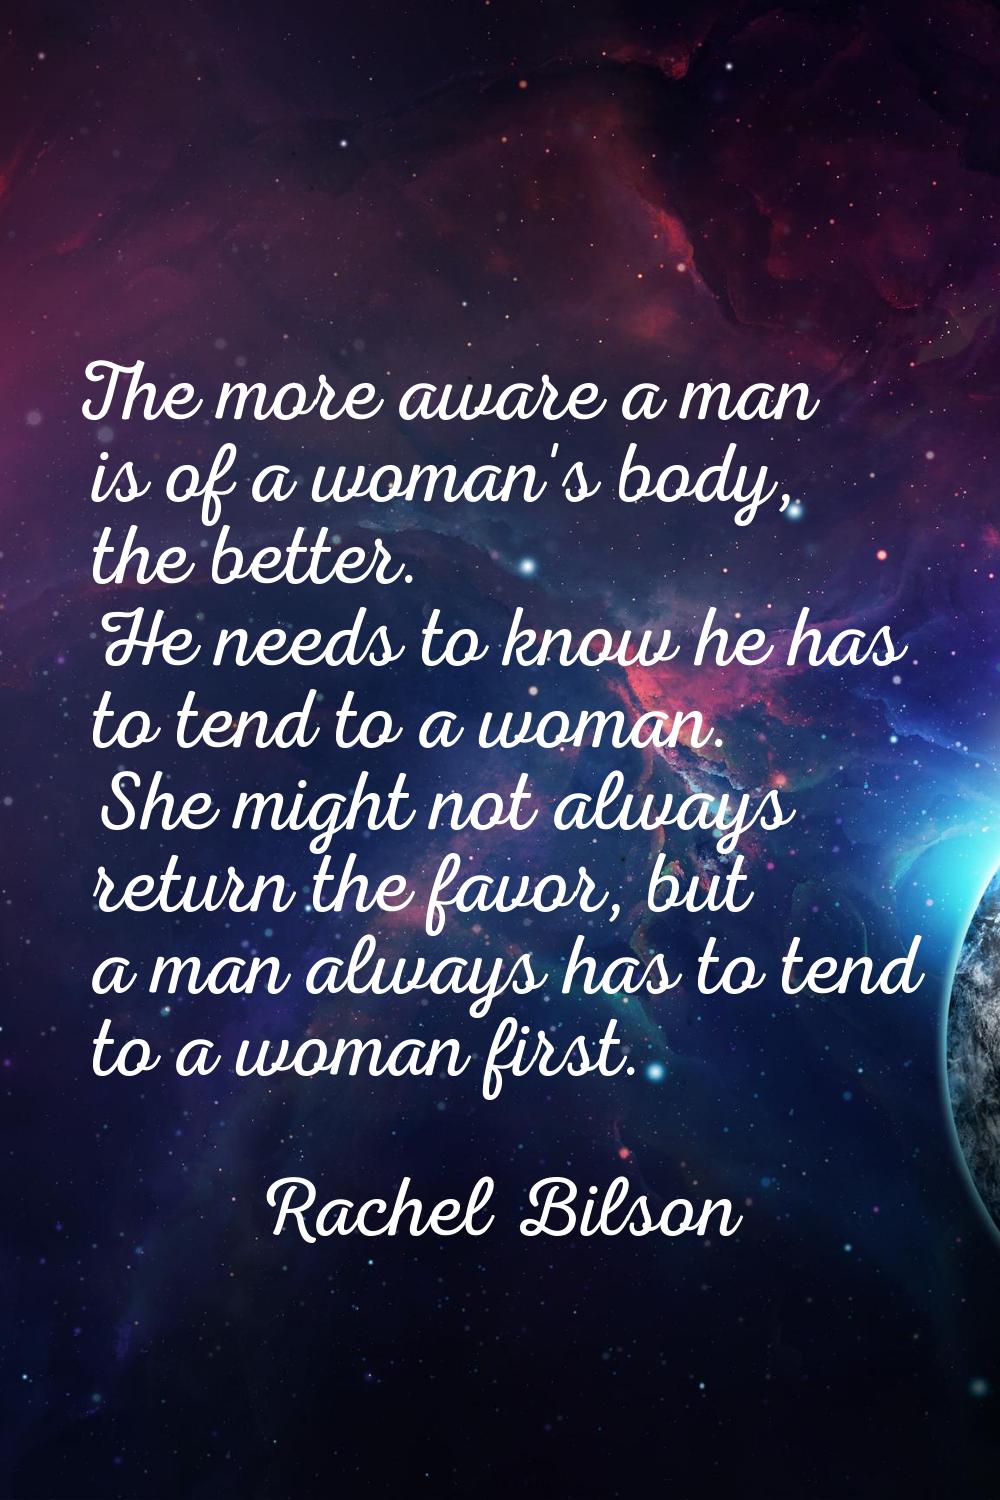 The more aware a man is of a woman's body, the better. He needs to know he has to tend to a woman. 